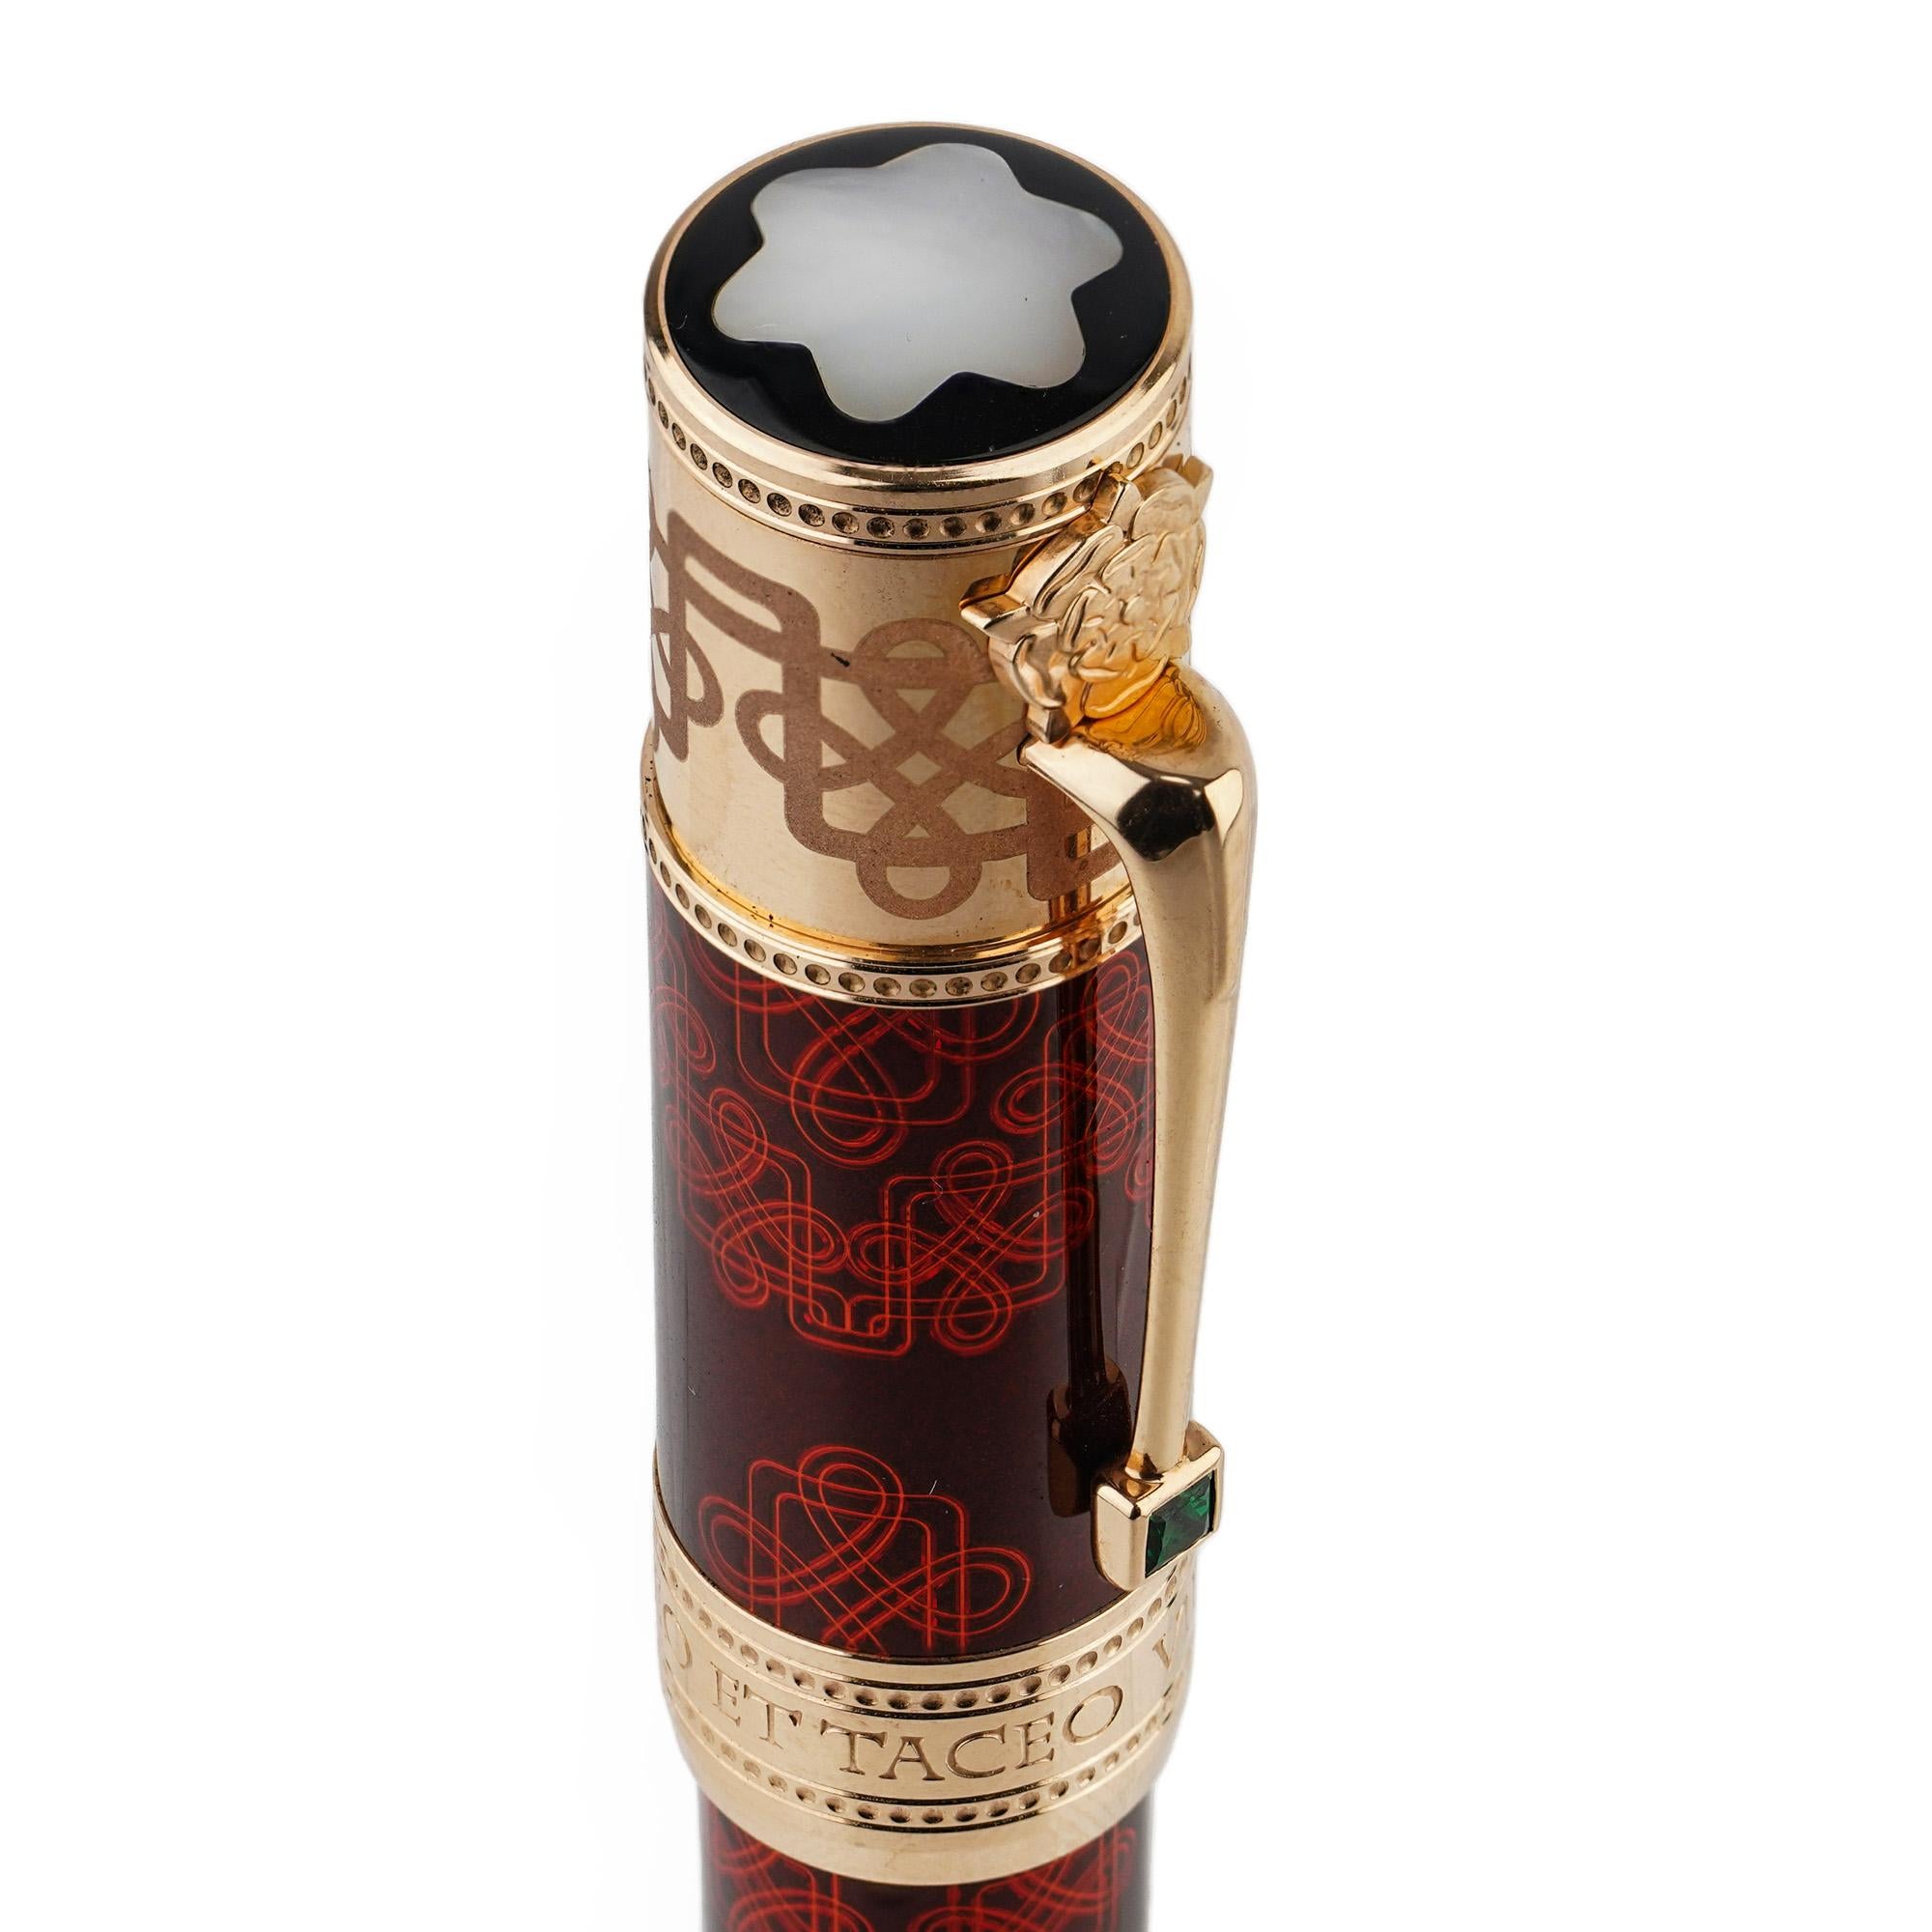 Montblanc Elizabeth I Patron of Art Series Limited Edition 612/888 Fountain Pen For Sale 5